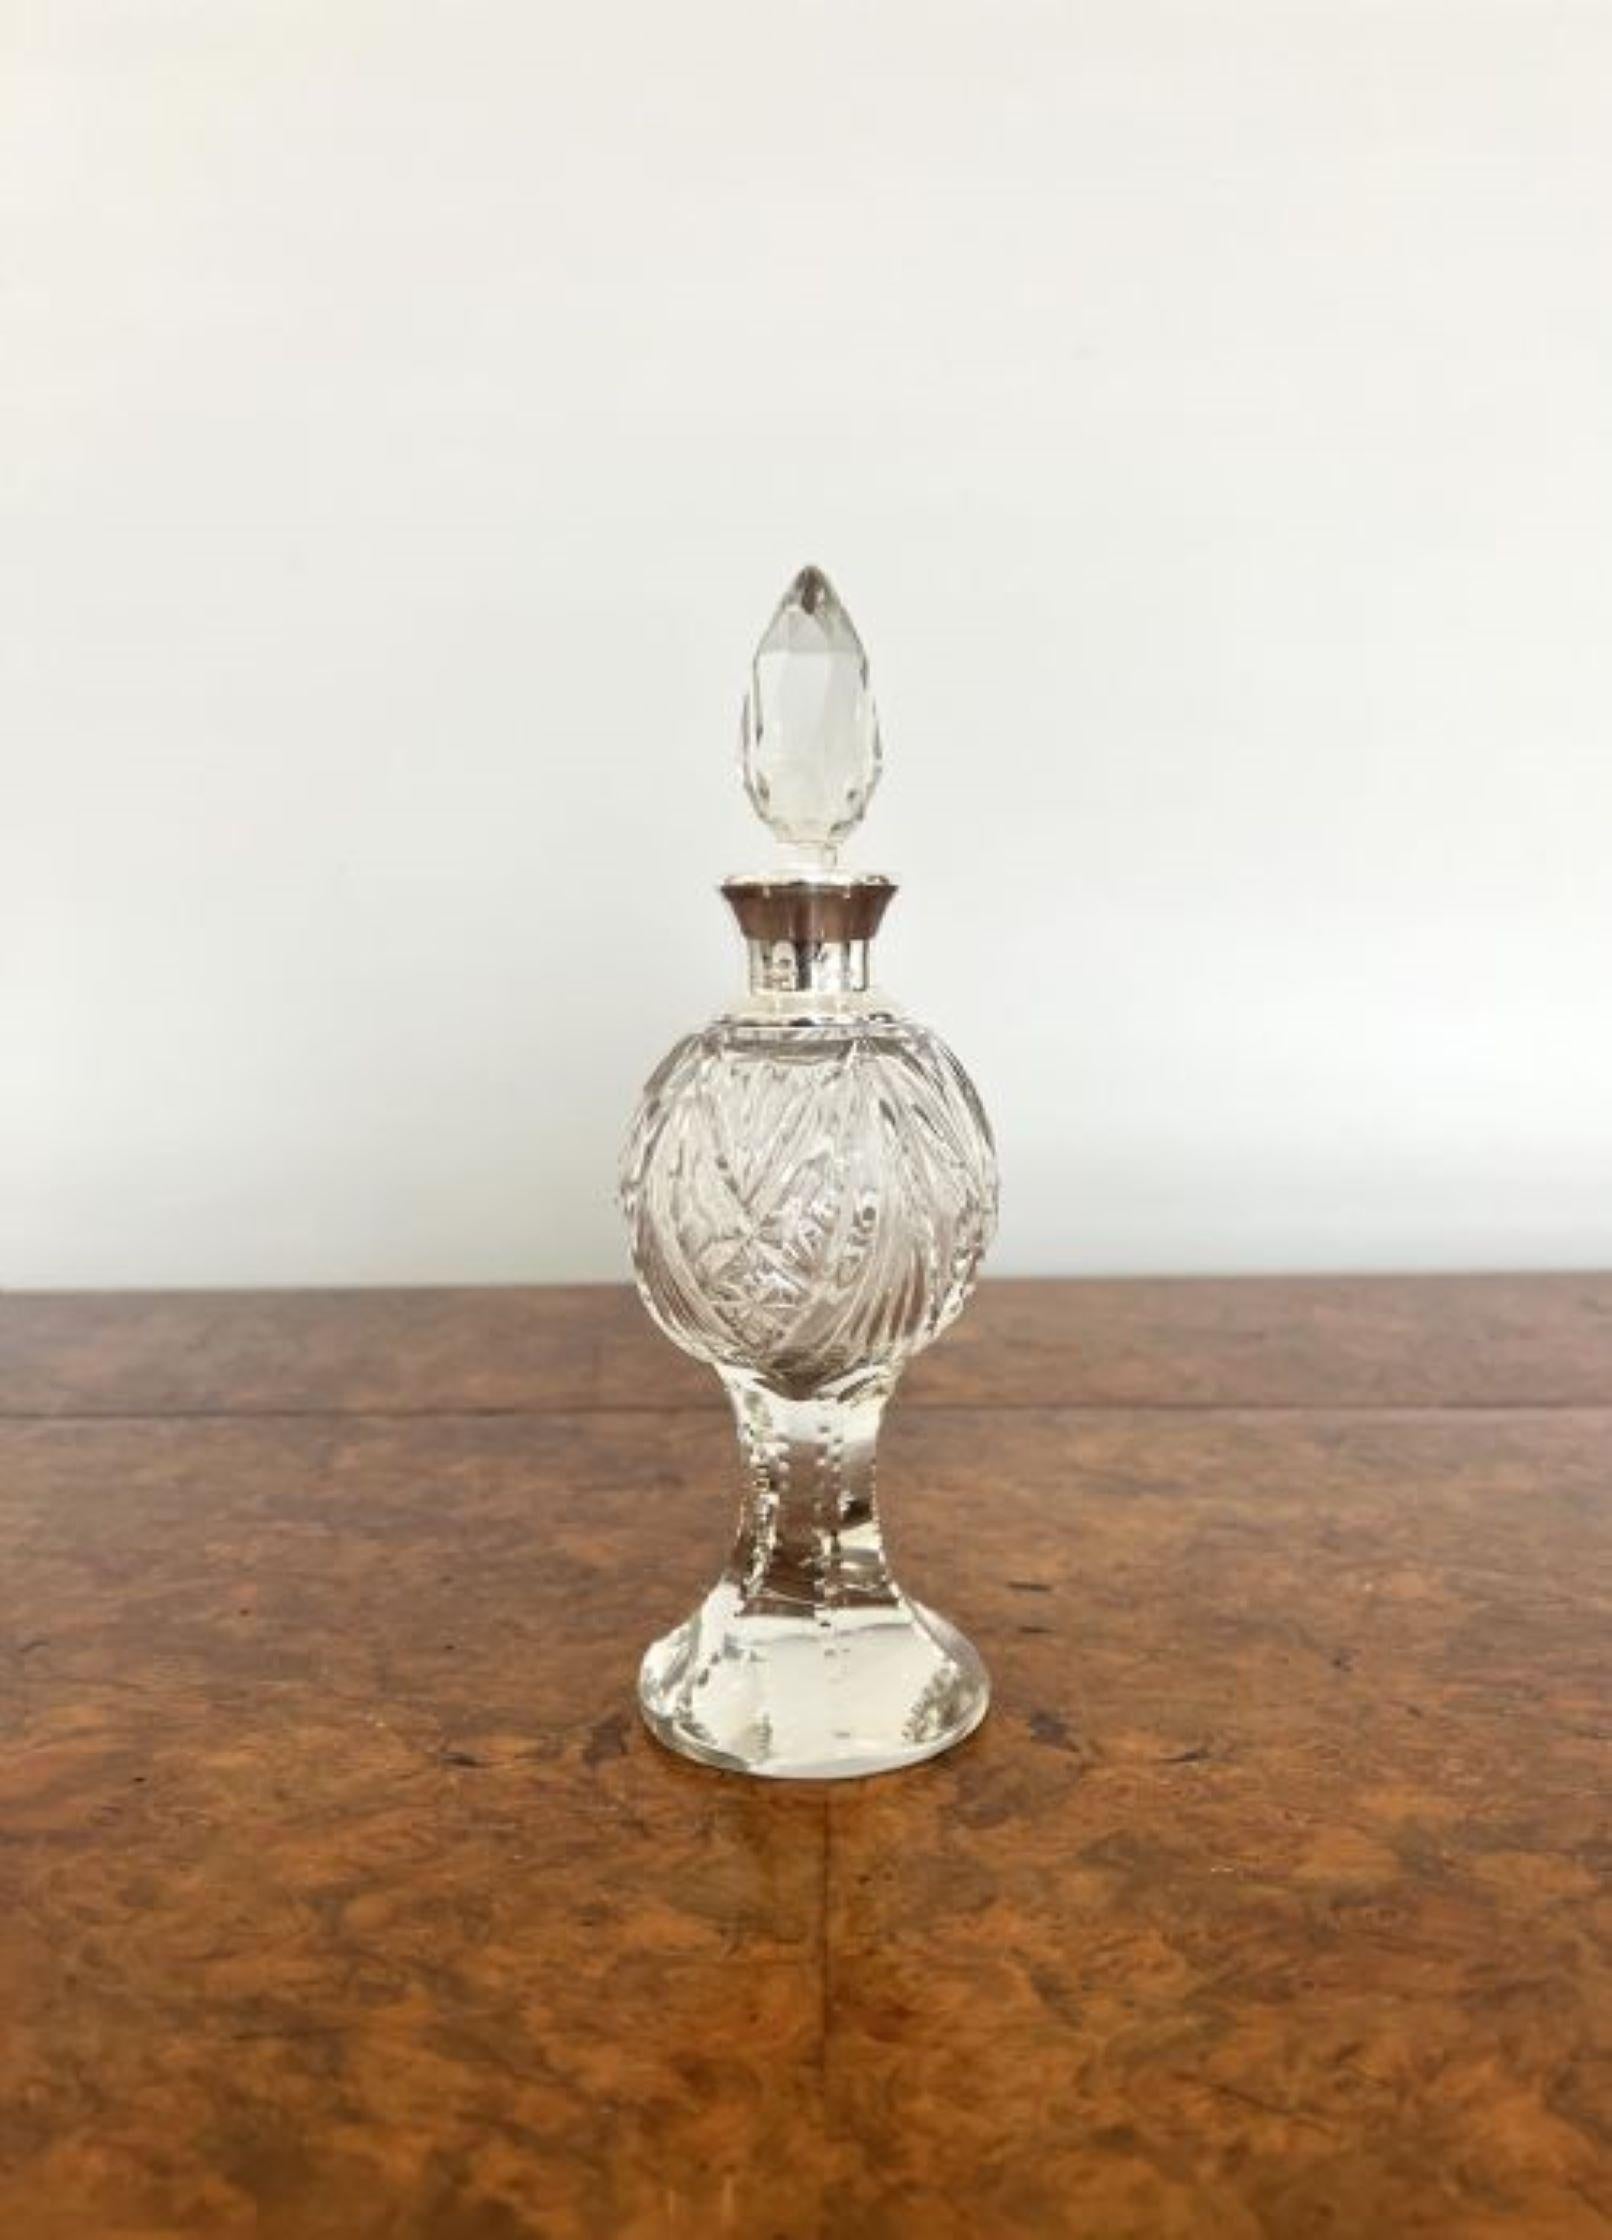 Fine quality antique Edwardian silver mounted cut glass bottle having a quality silver mounted cut glass bottle with a bulbous body raised on a circular base, a silver mounted collar with the original stopper. 